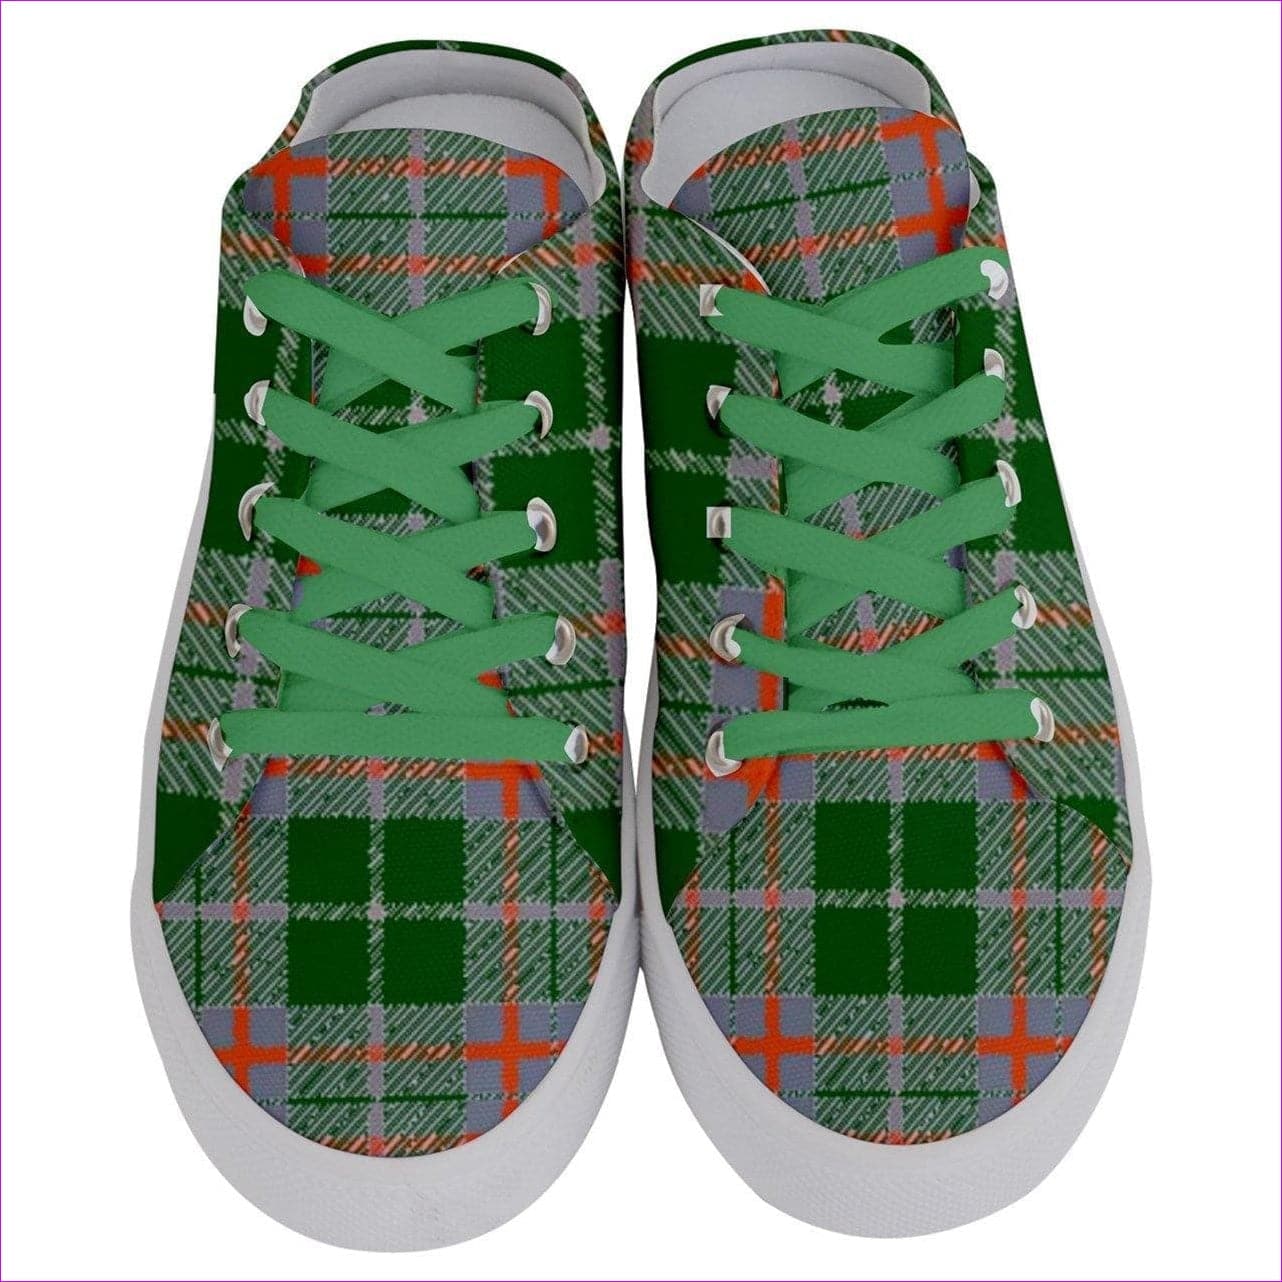 Tribute to Plaid Women's Half Slippers - Green - women's shoe at TFC&H Co.